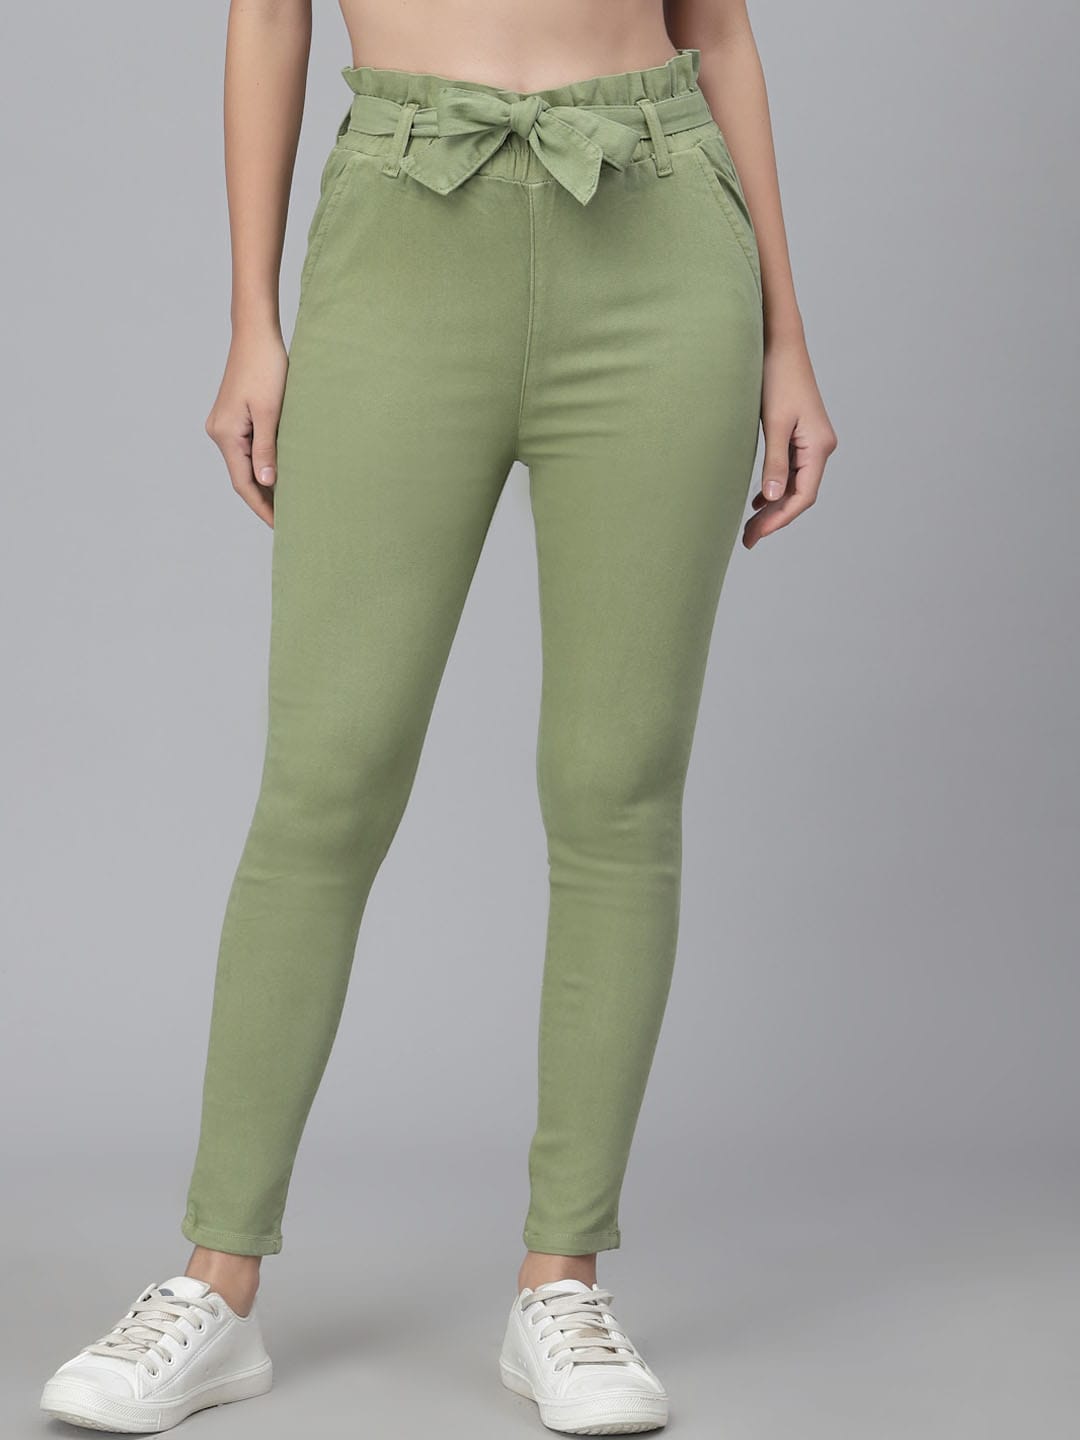 Style Quotient Women Slim Fit Trousers Price in India